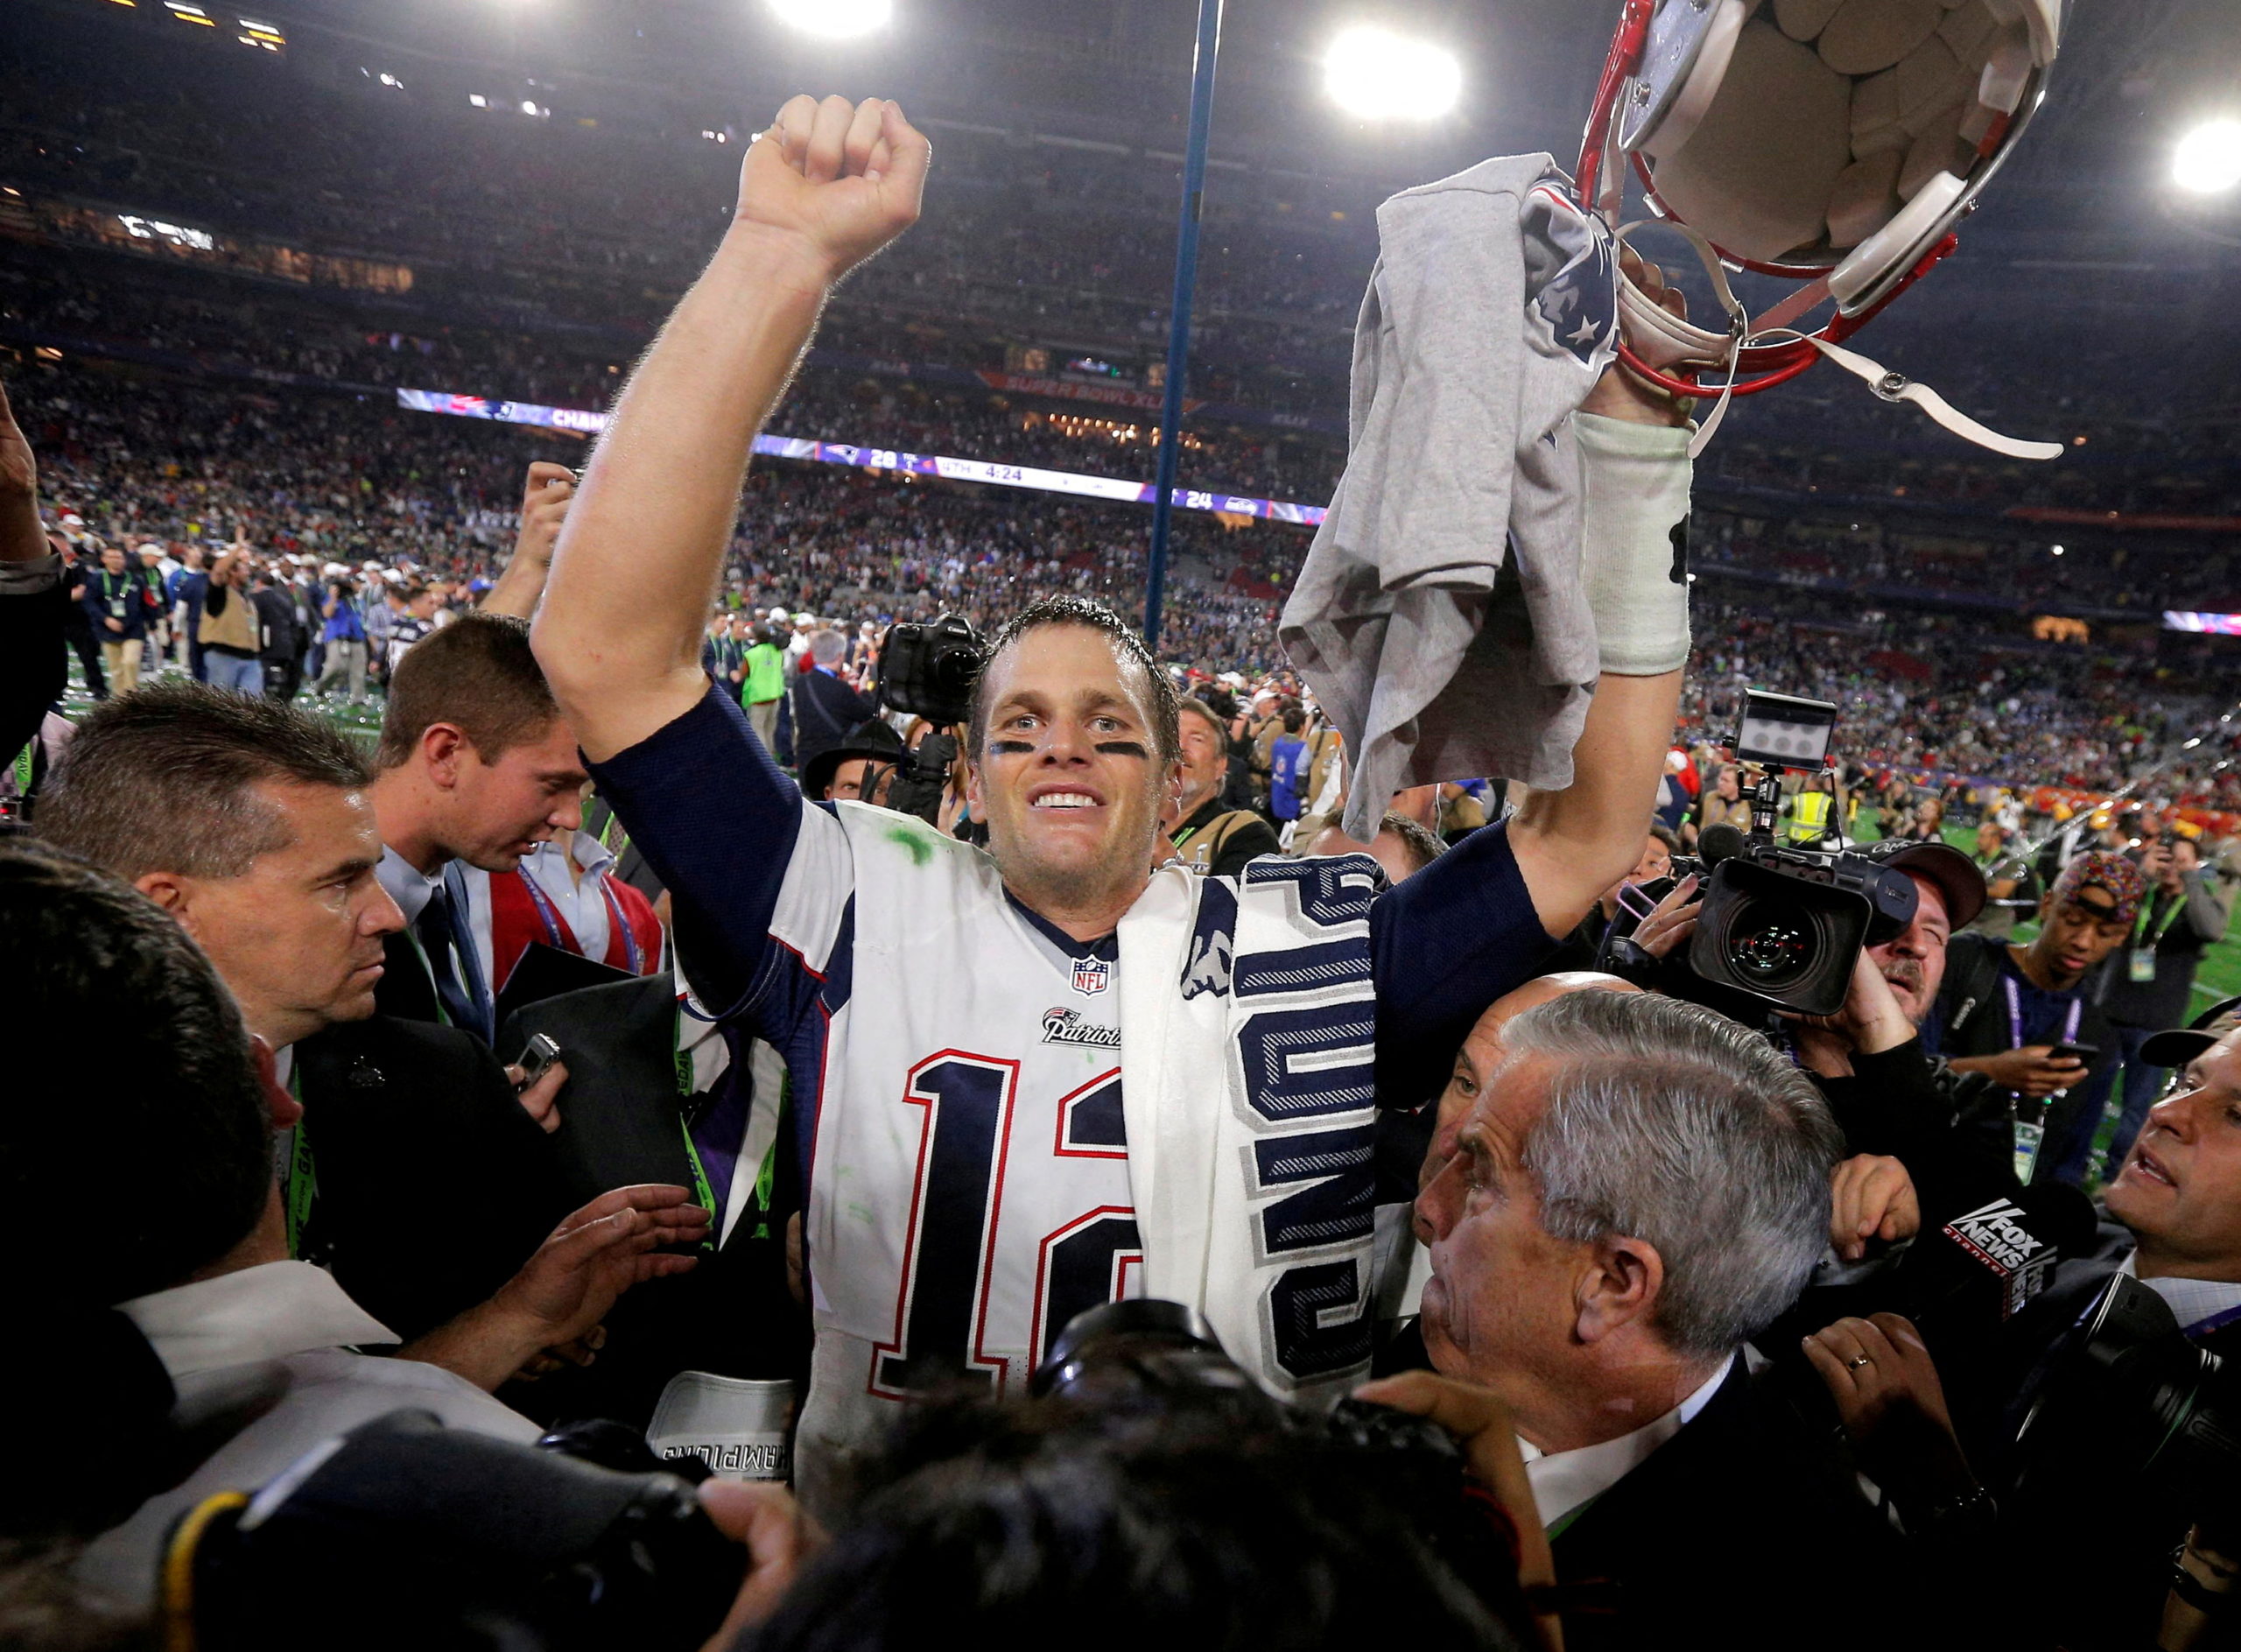 New England Patriots quarterback Tom Brady (12) celebrates his team's win over the Seattle Seahawks in the NFL Super Bowl XLIX football game in Glendale, Arizona February 1, 2015. 